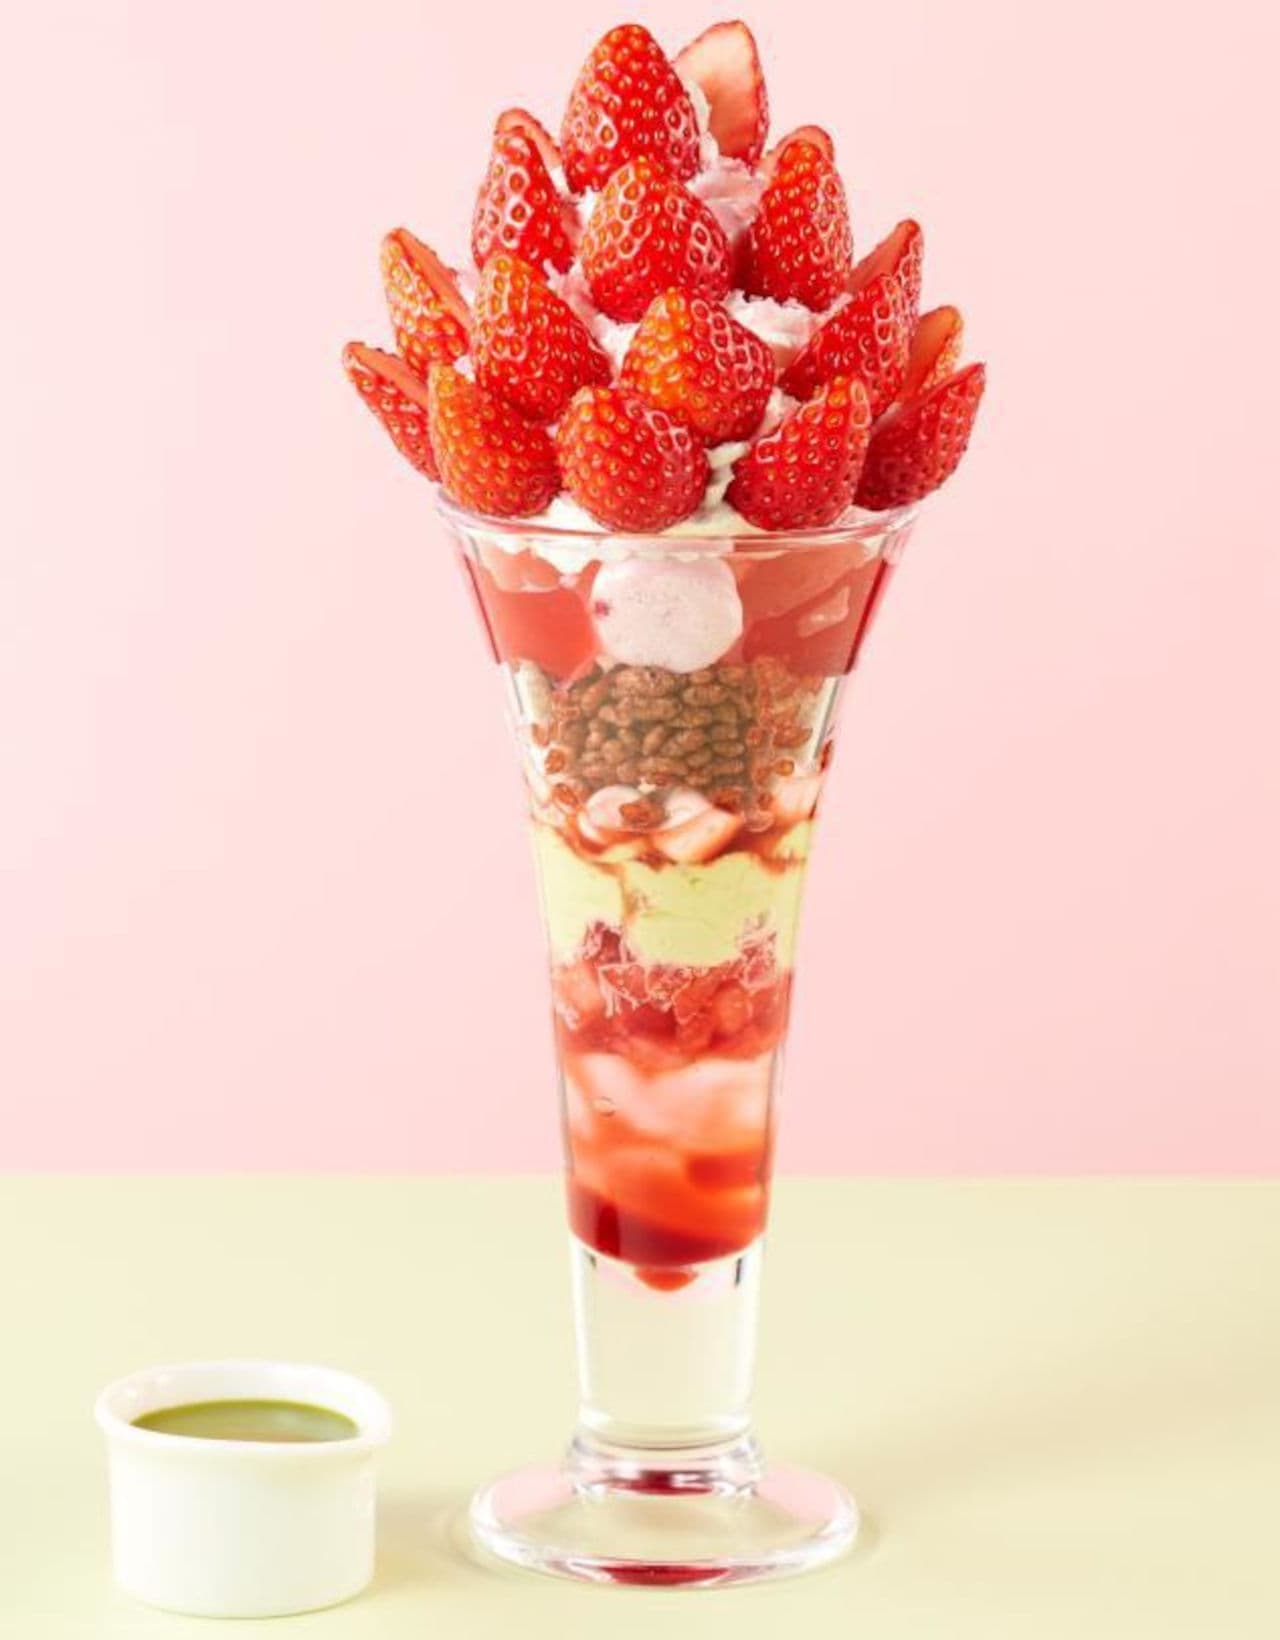 Cocos "Queen Parfait with Strawberries and Pistachios"